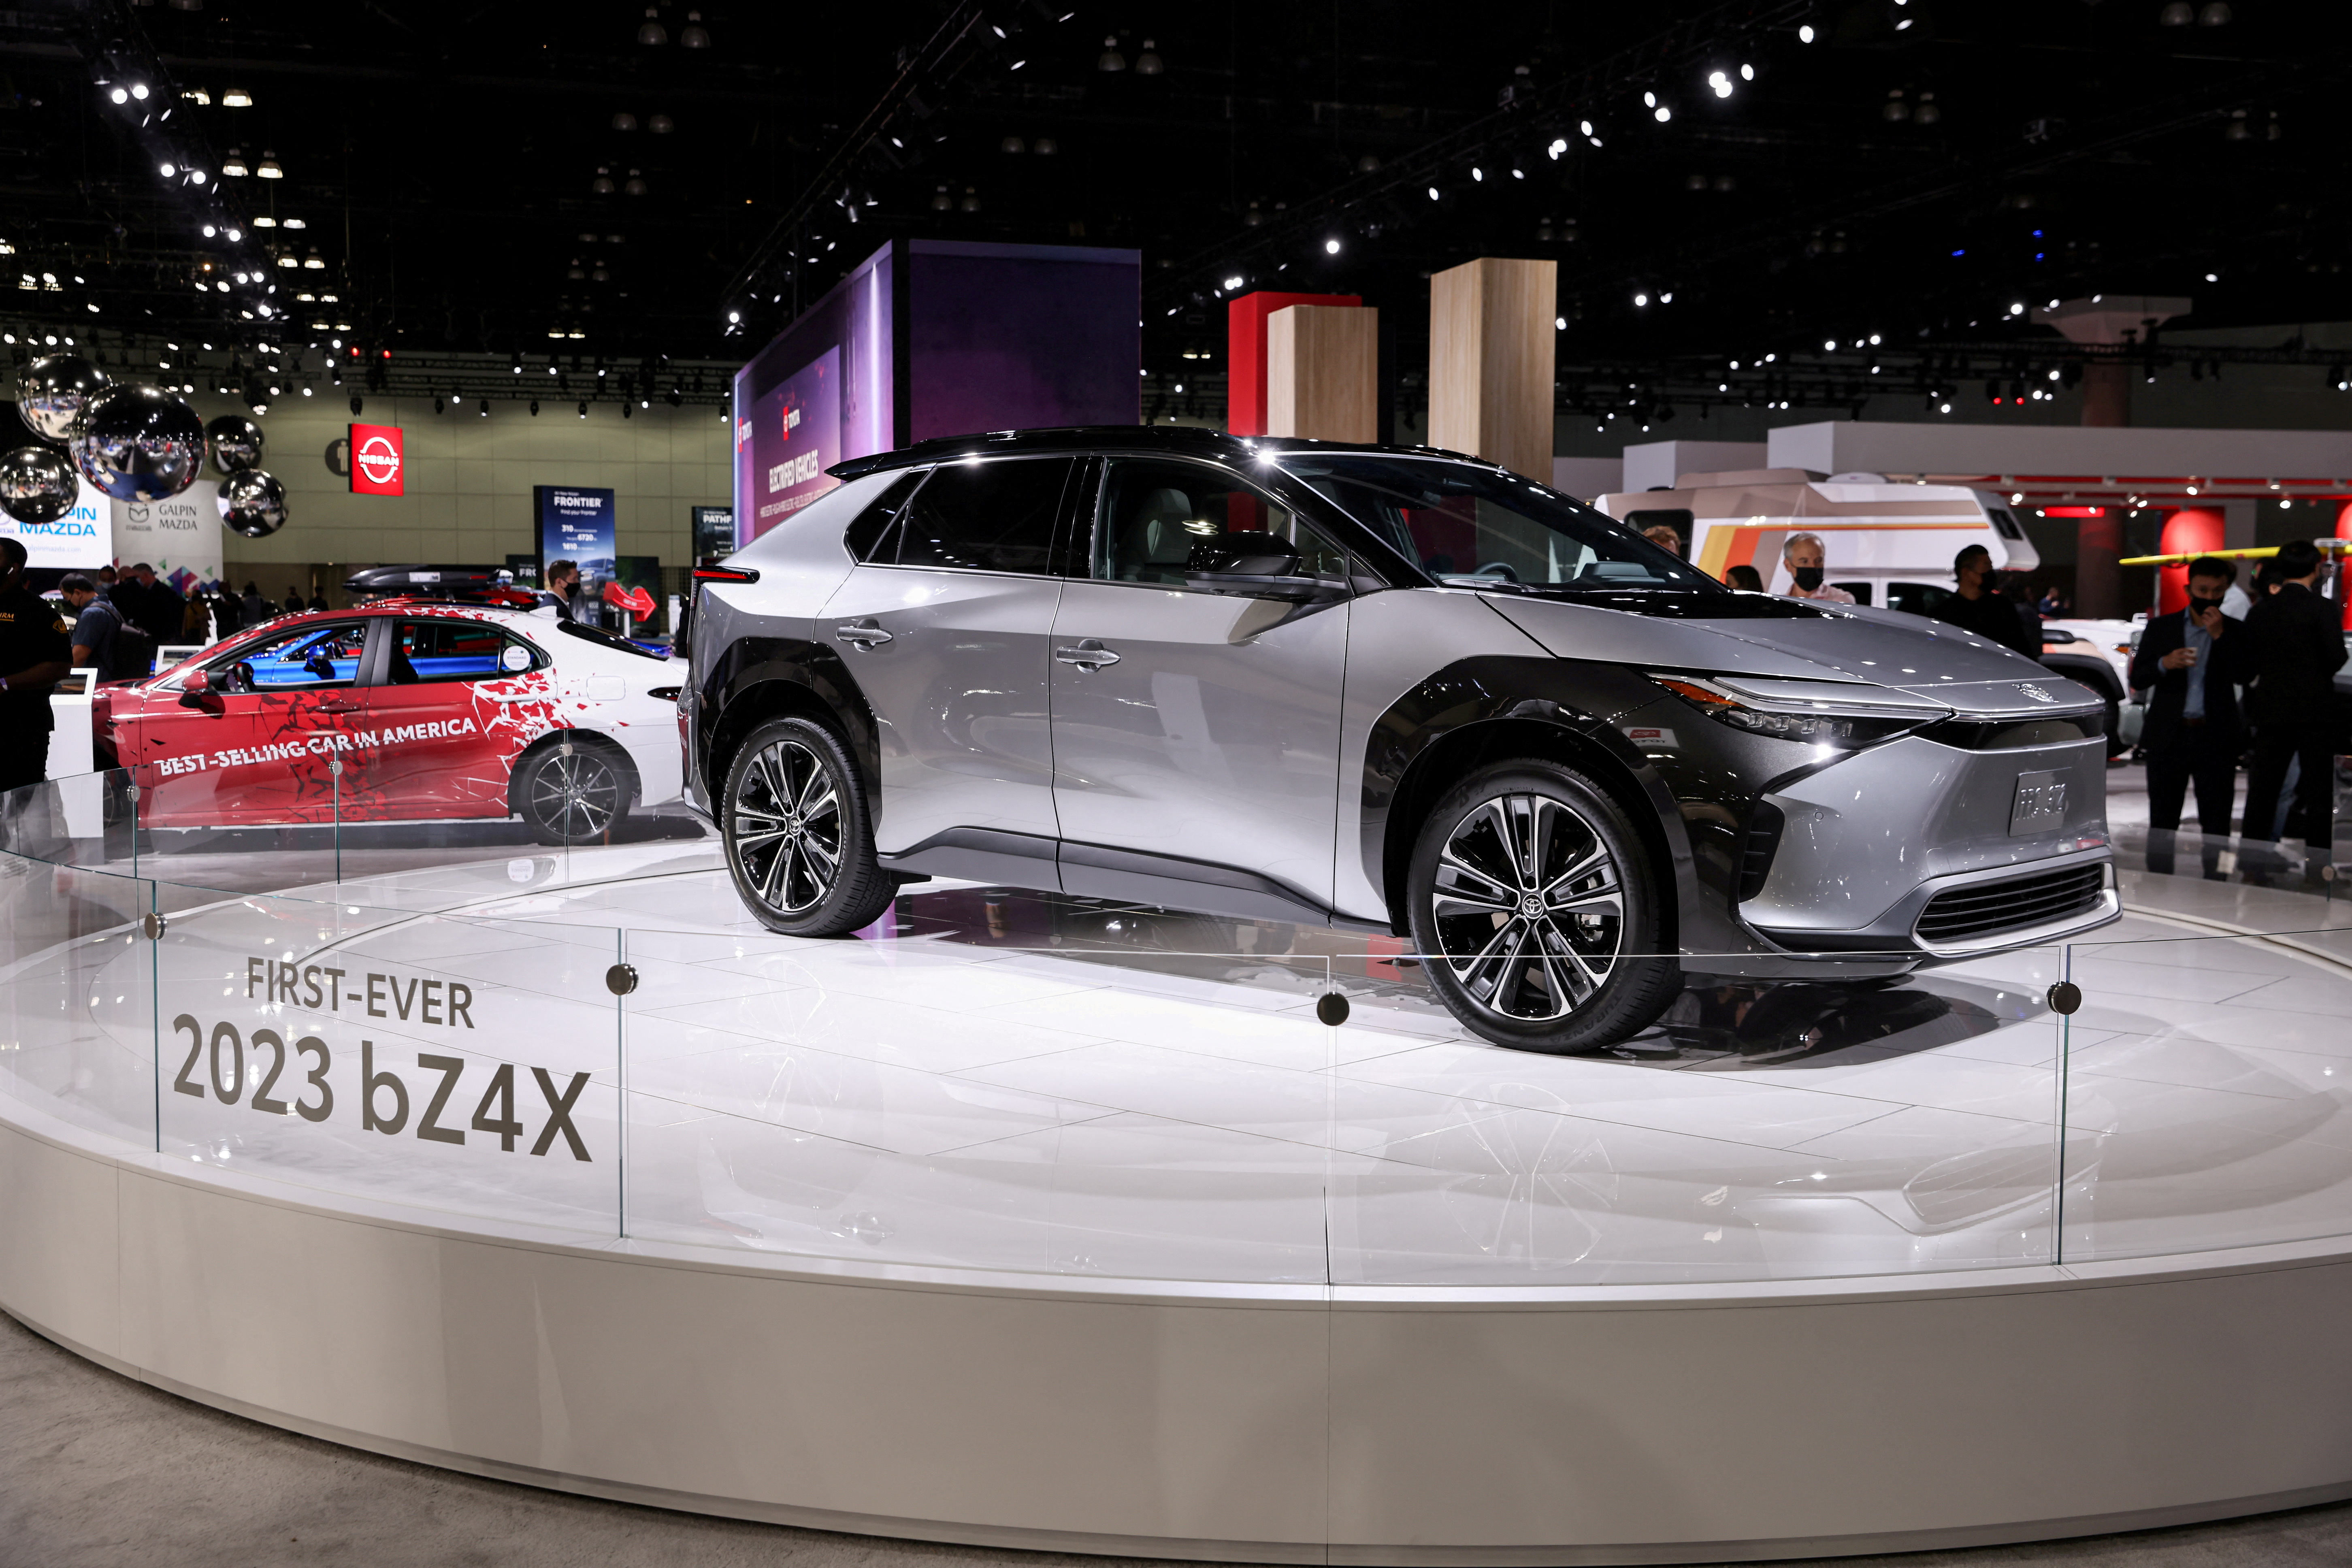 A 2023 Toyota bZ4X all-electric SUV is displayed during the 2021 LA Auto Show